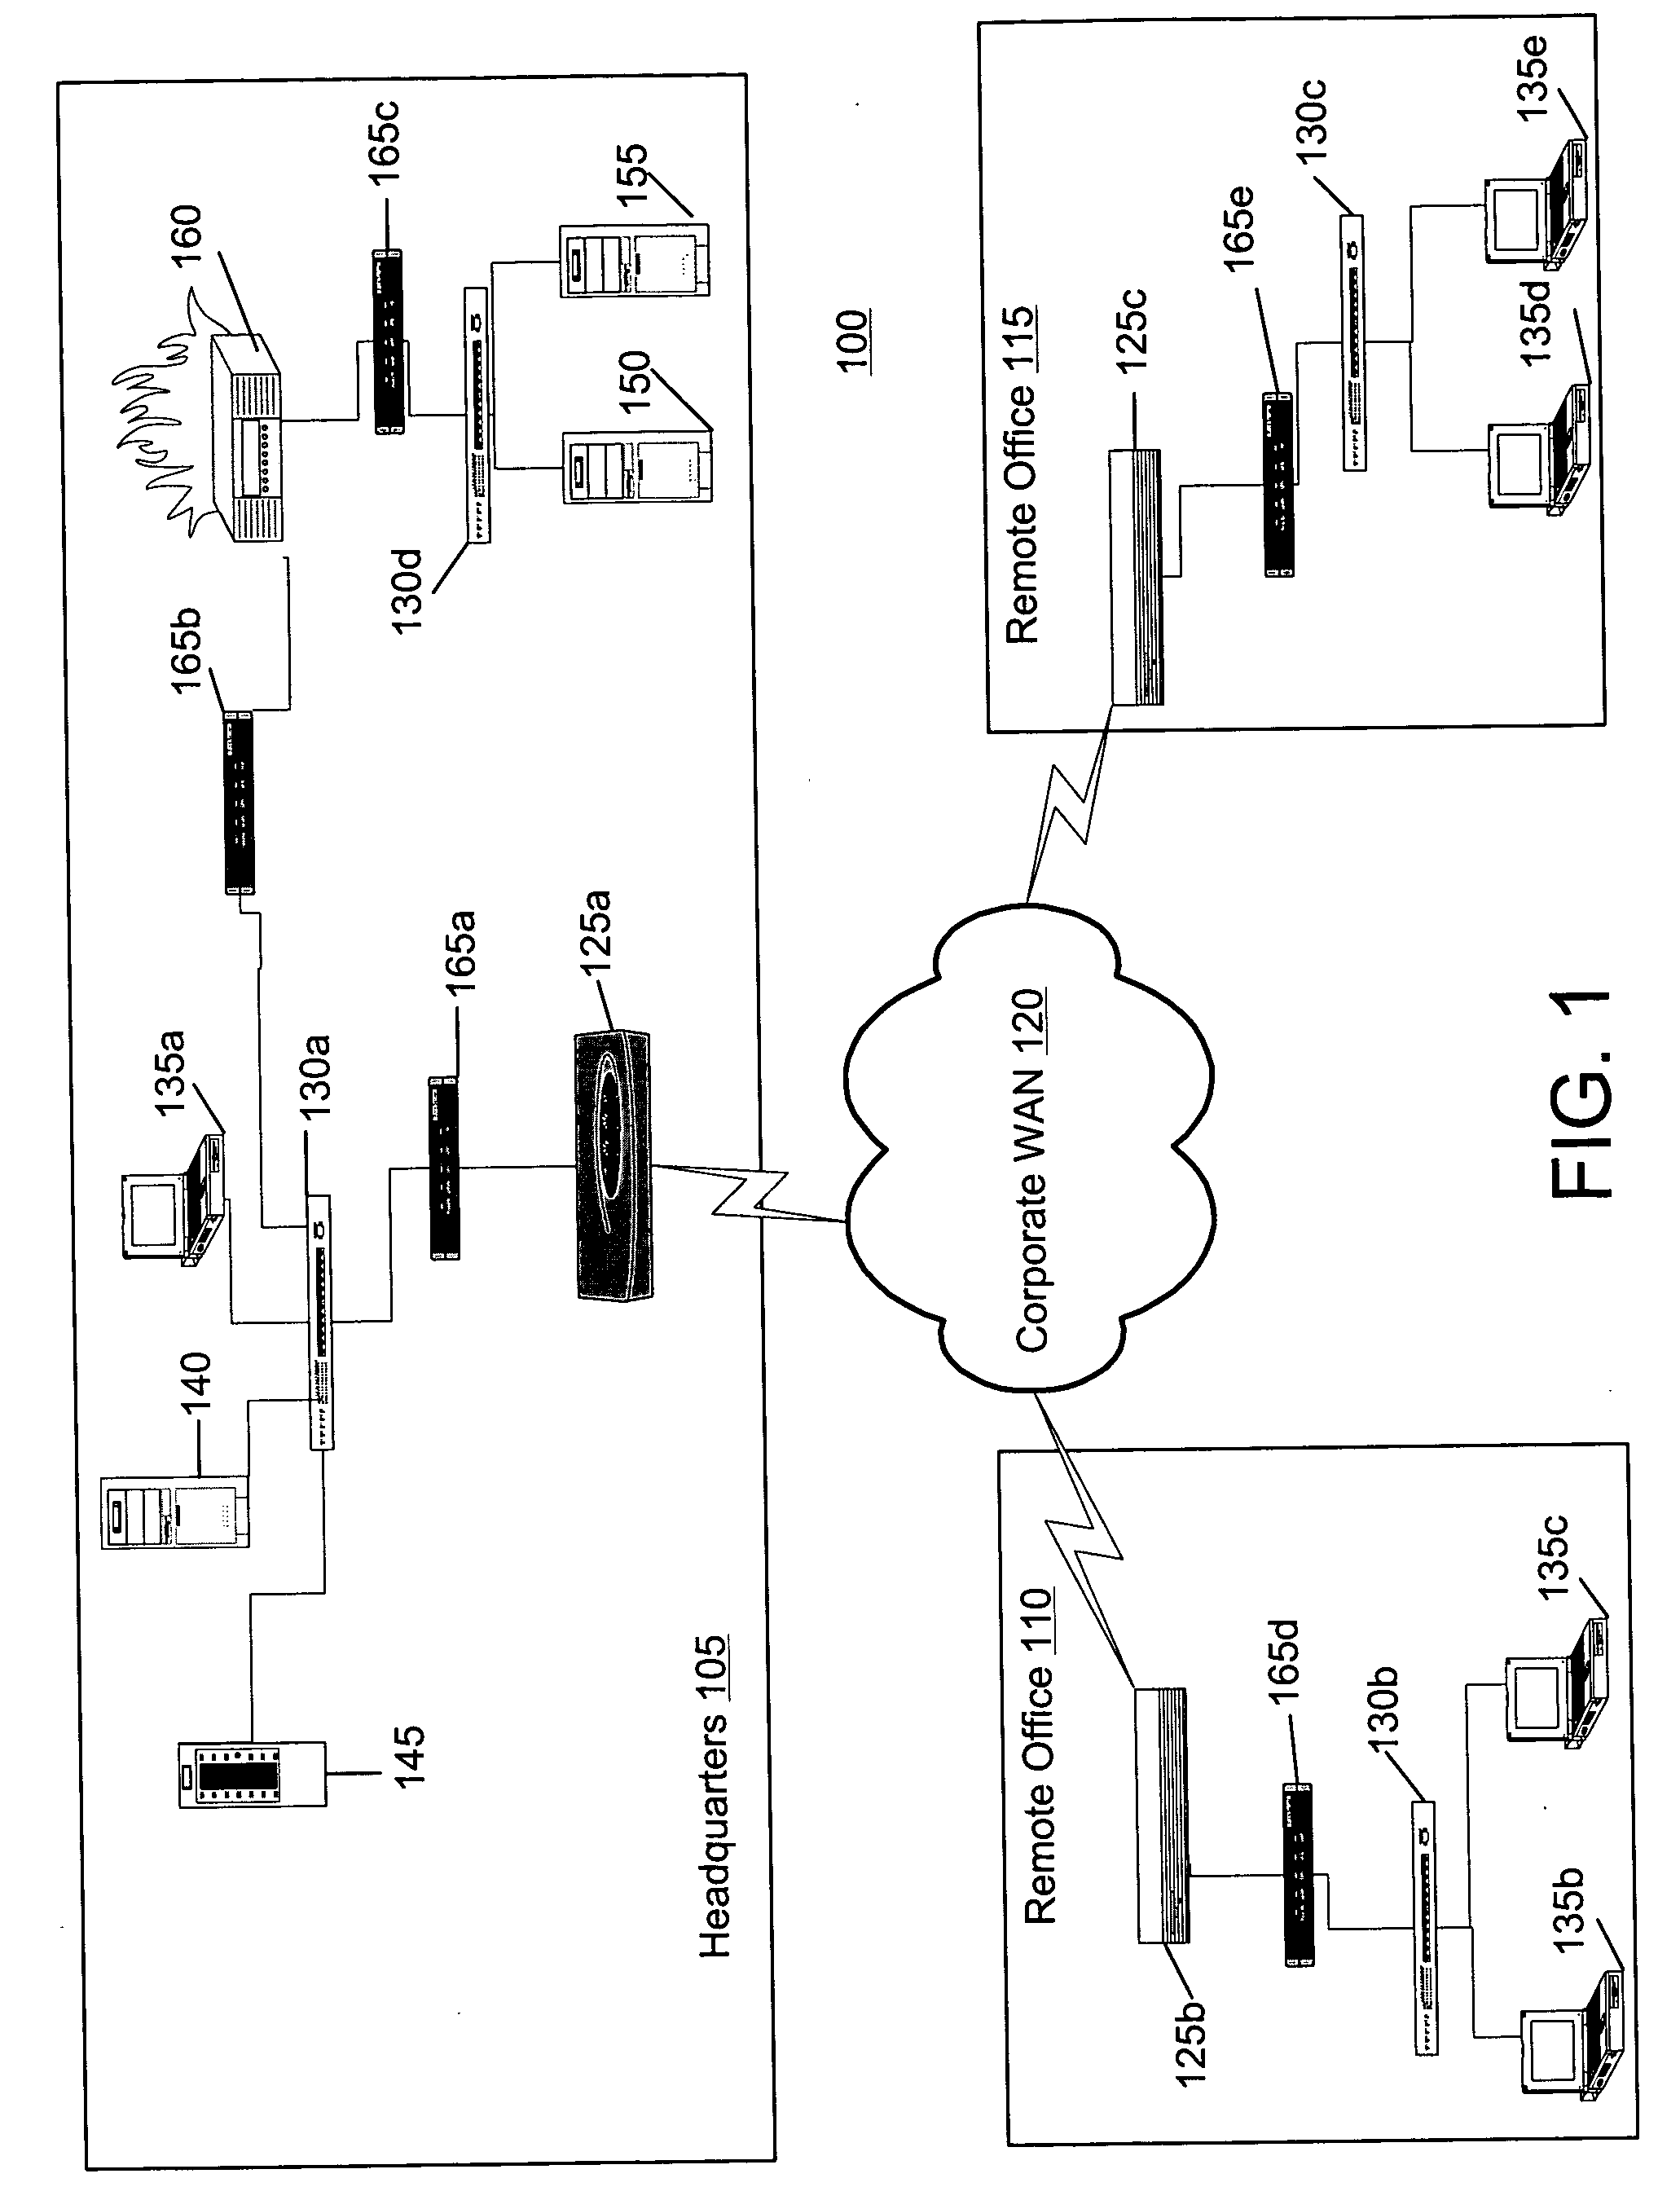 Monitoring propagation protection within a network